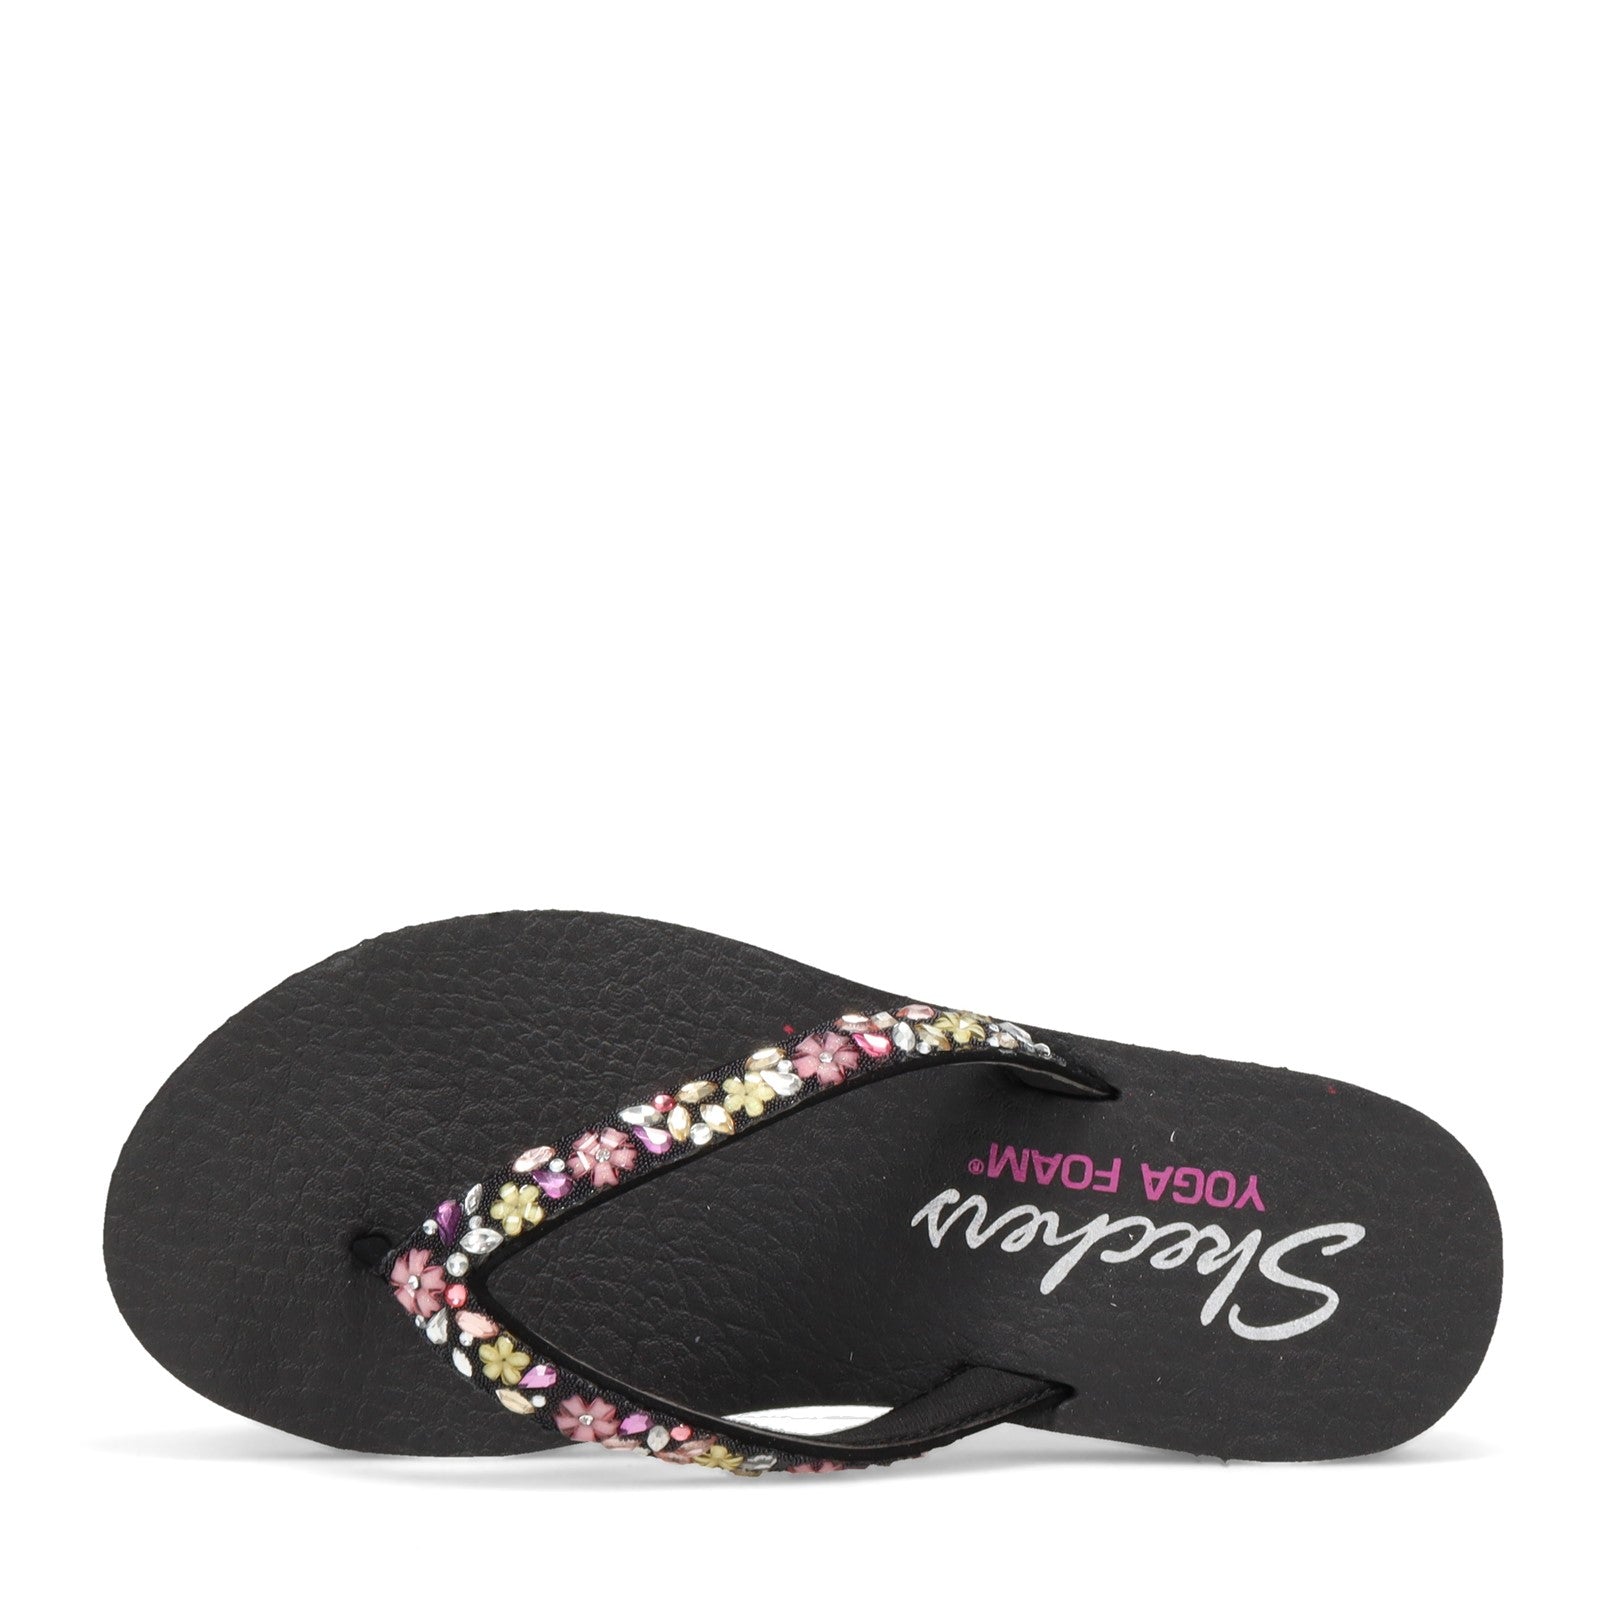 Buy Skechers womens MEDITATION - PEARL PERFECTION BLK Sandal - 2 UK (5 US)  (119655) at Amazon.in